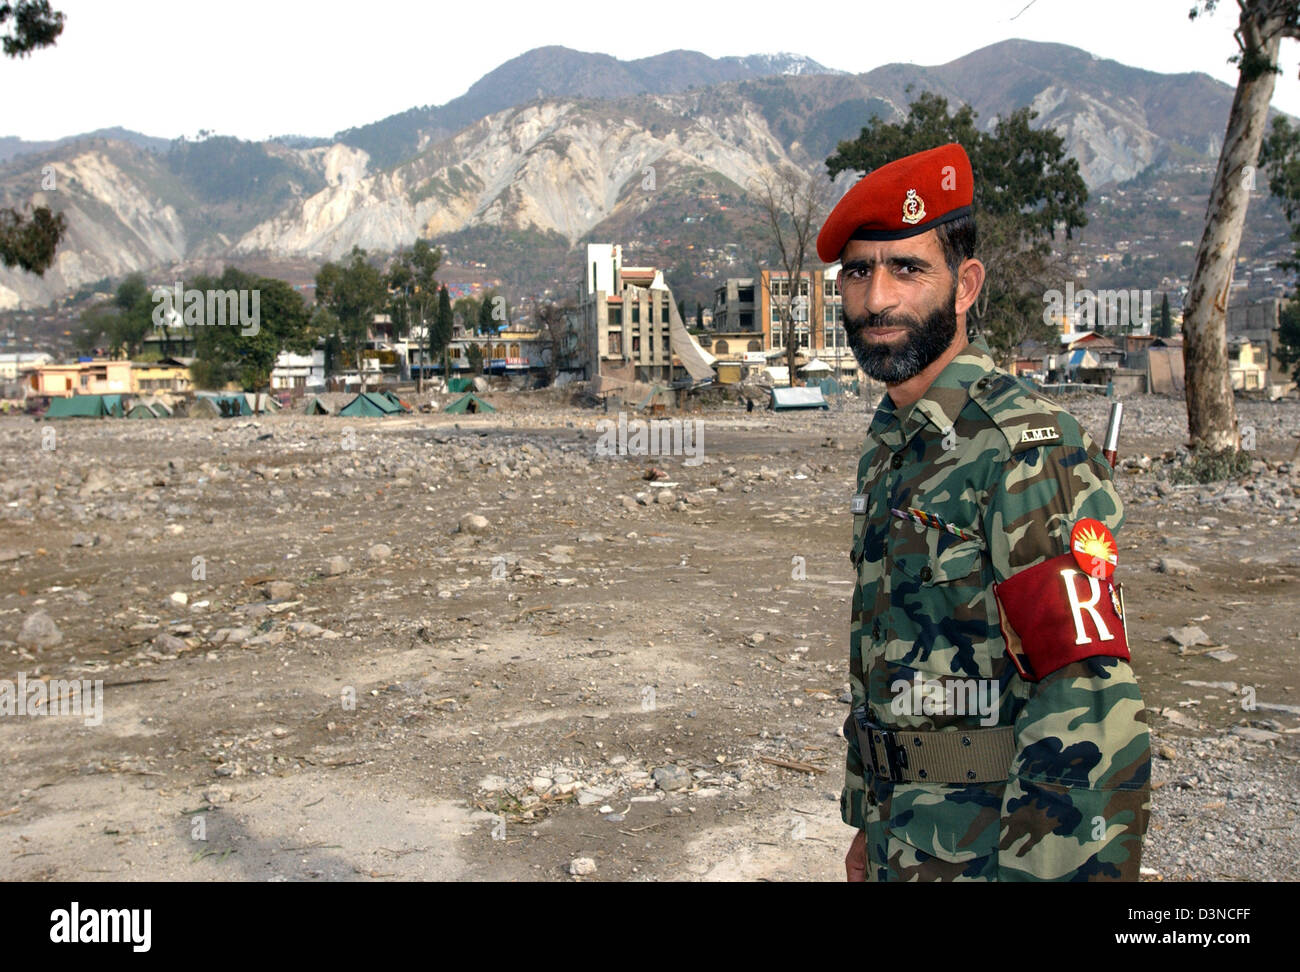 A Pakistani soldier stand nearby the ruins of a destroyed hsopital in Muzaffarabad in Pakistan, Monday, 30 January 2006. Millions of people suffered in the aftermath of an earthquake which struck in October 2005 hitting the province of Kashmir. Photo: Wolfgang Langenstrassen Stock Photo